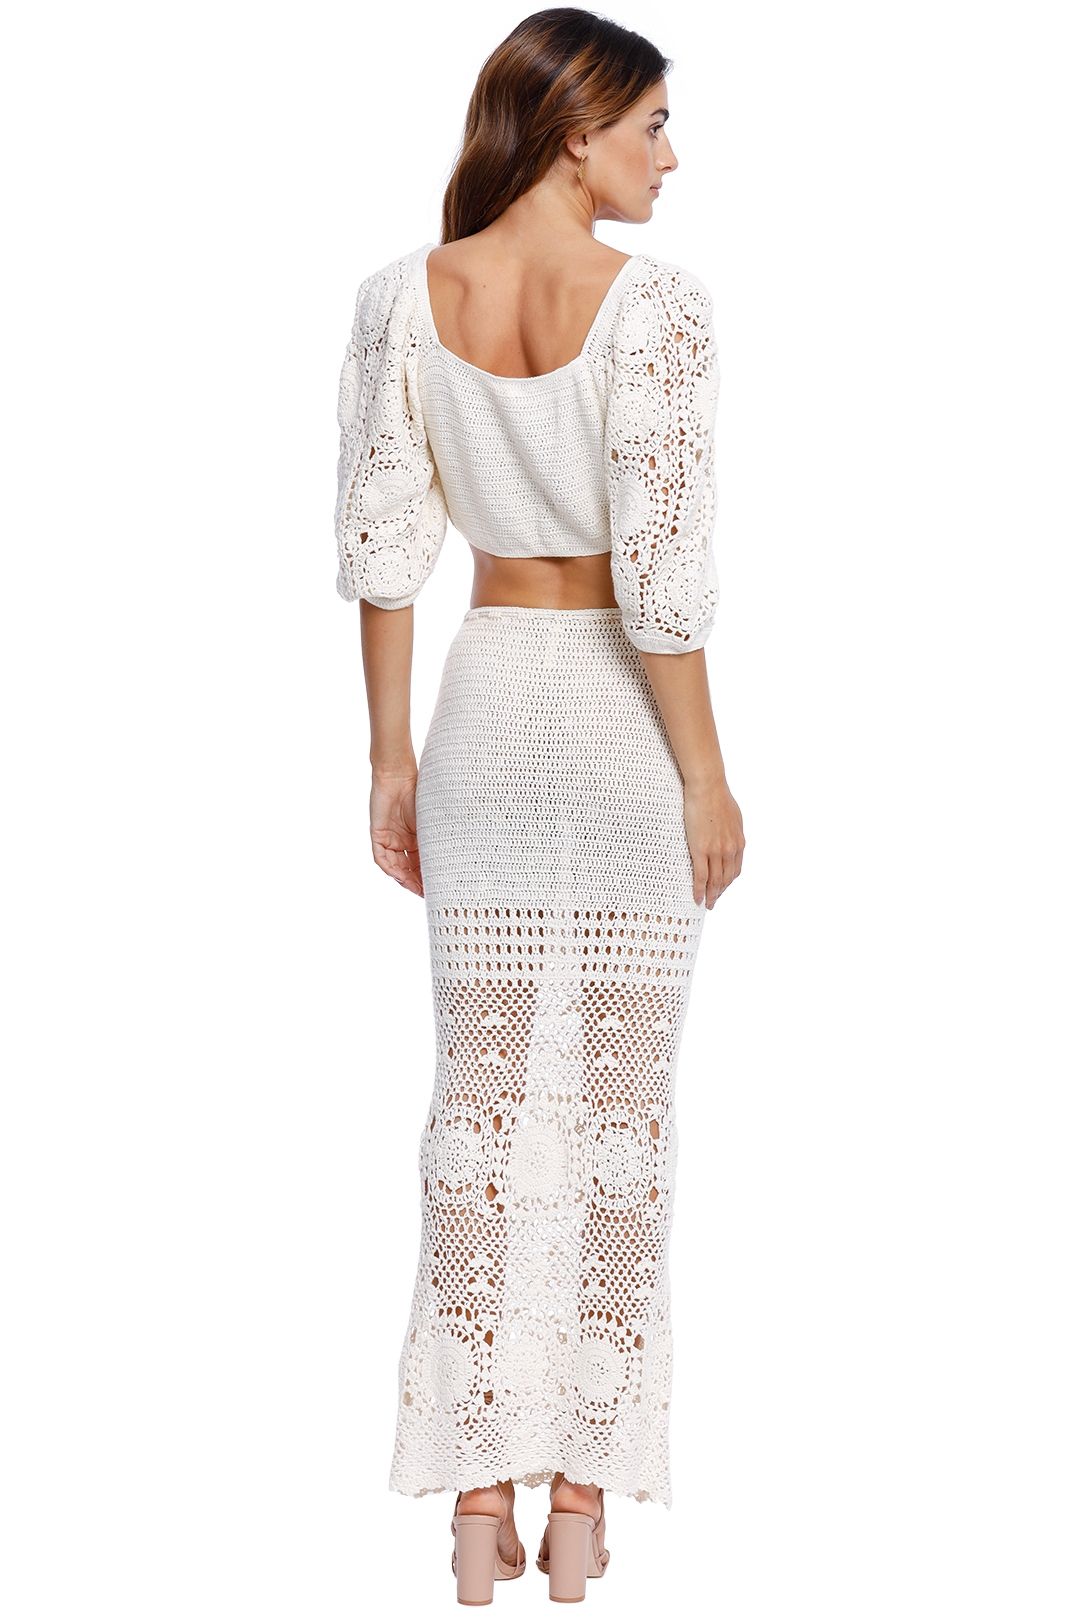 Spell Let the Sunshine in Crochet Top and Skirt Set cutout